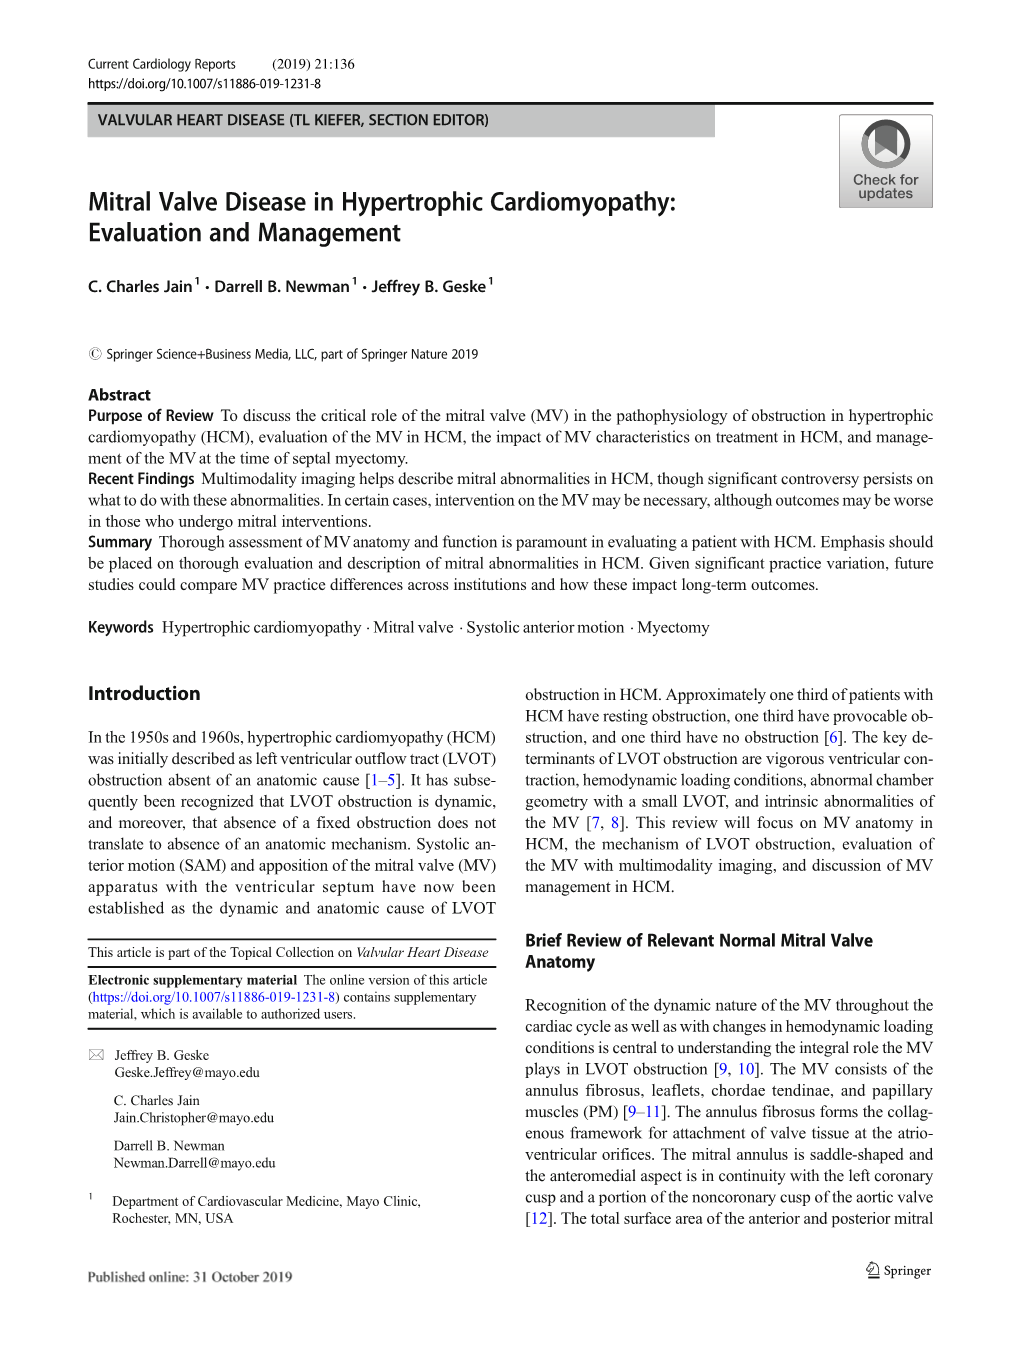 Mitral Valve Disease in Hypertrophic Cardiomyopathy:Evaluation And